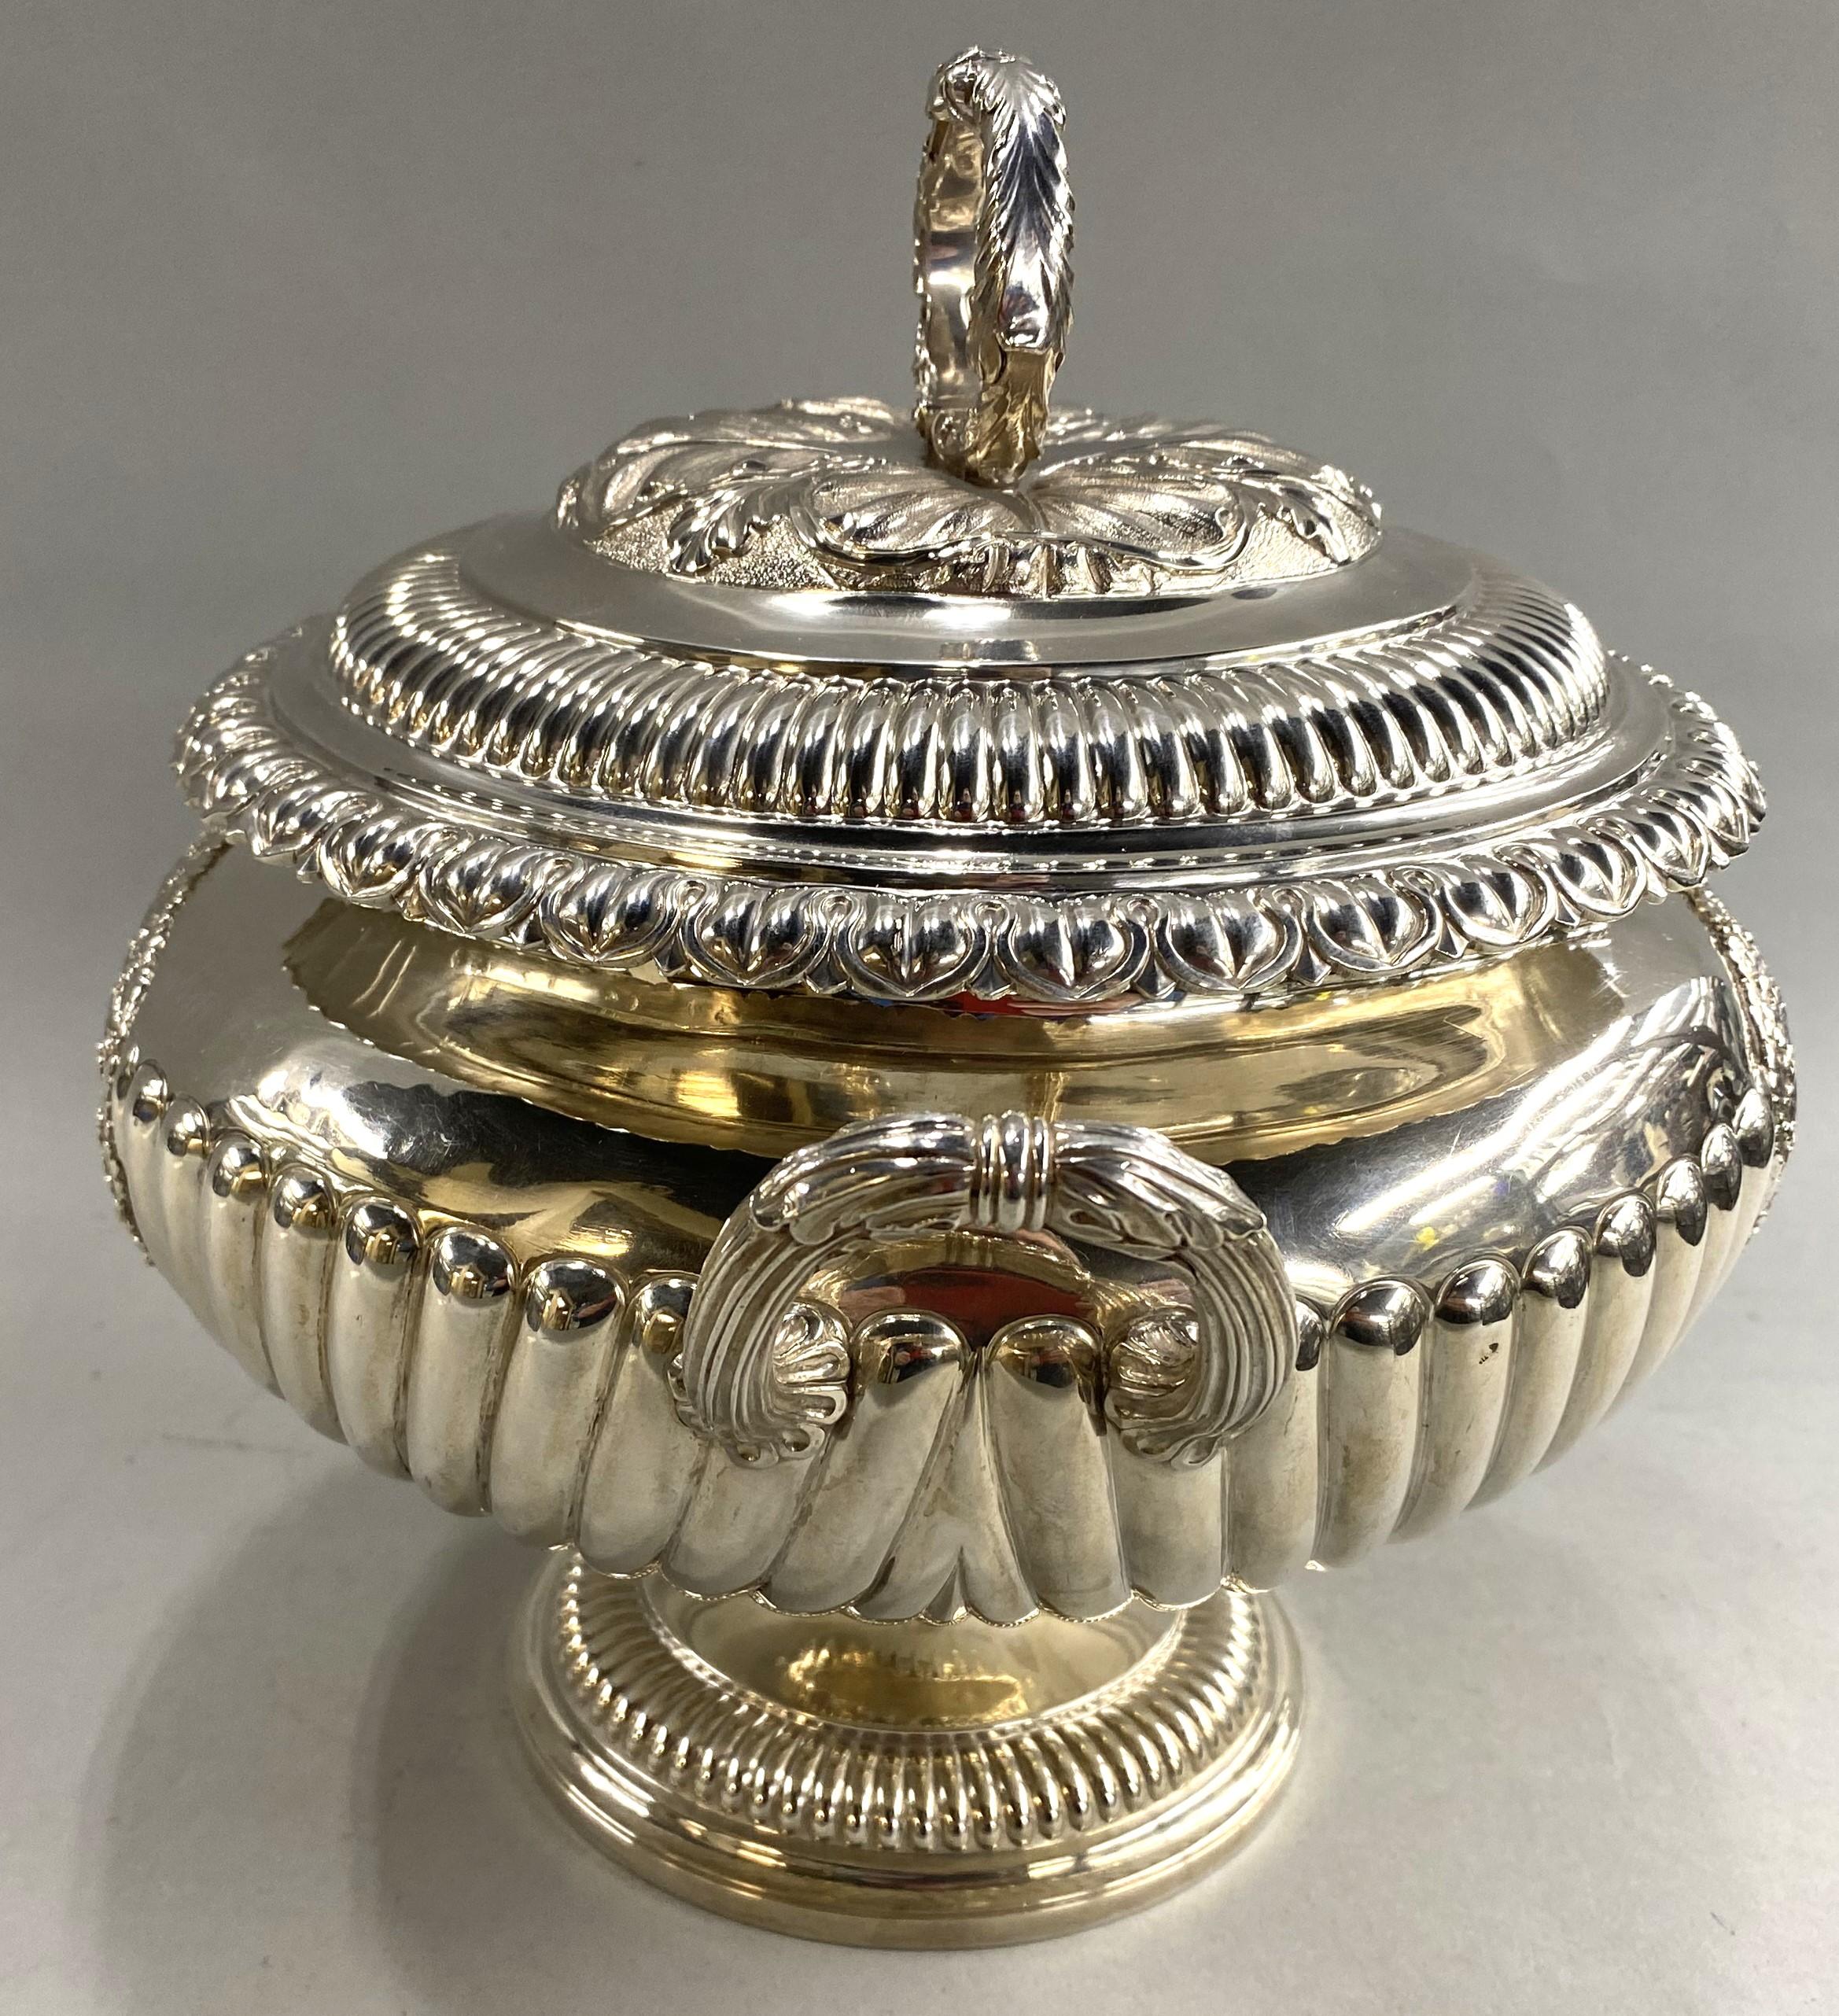 George IV Sterling Silver Covered Soup Tureen, Samuel Hennell, London c 1822 In Good Condition For Sale In Milford, NH